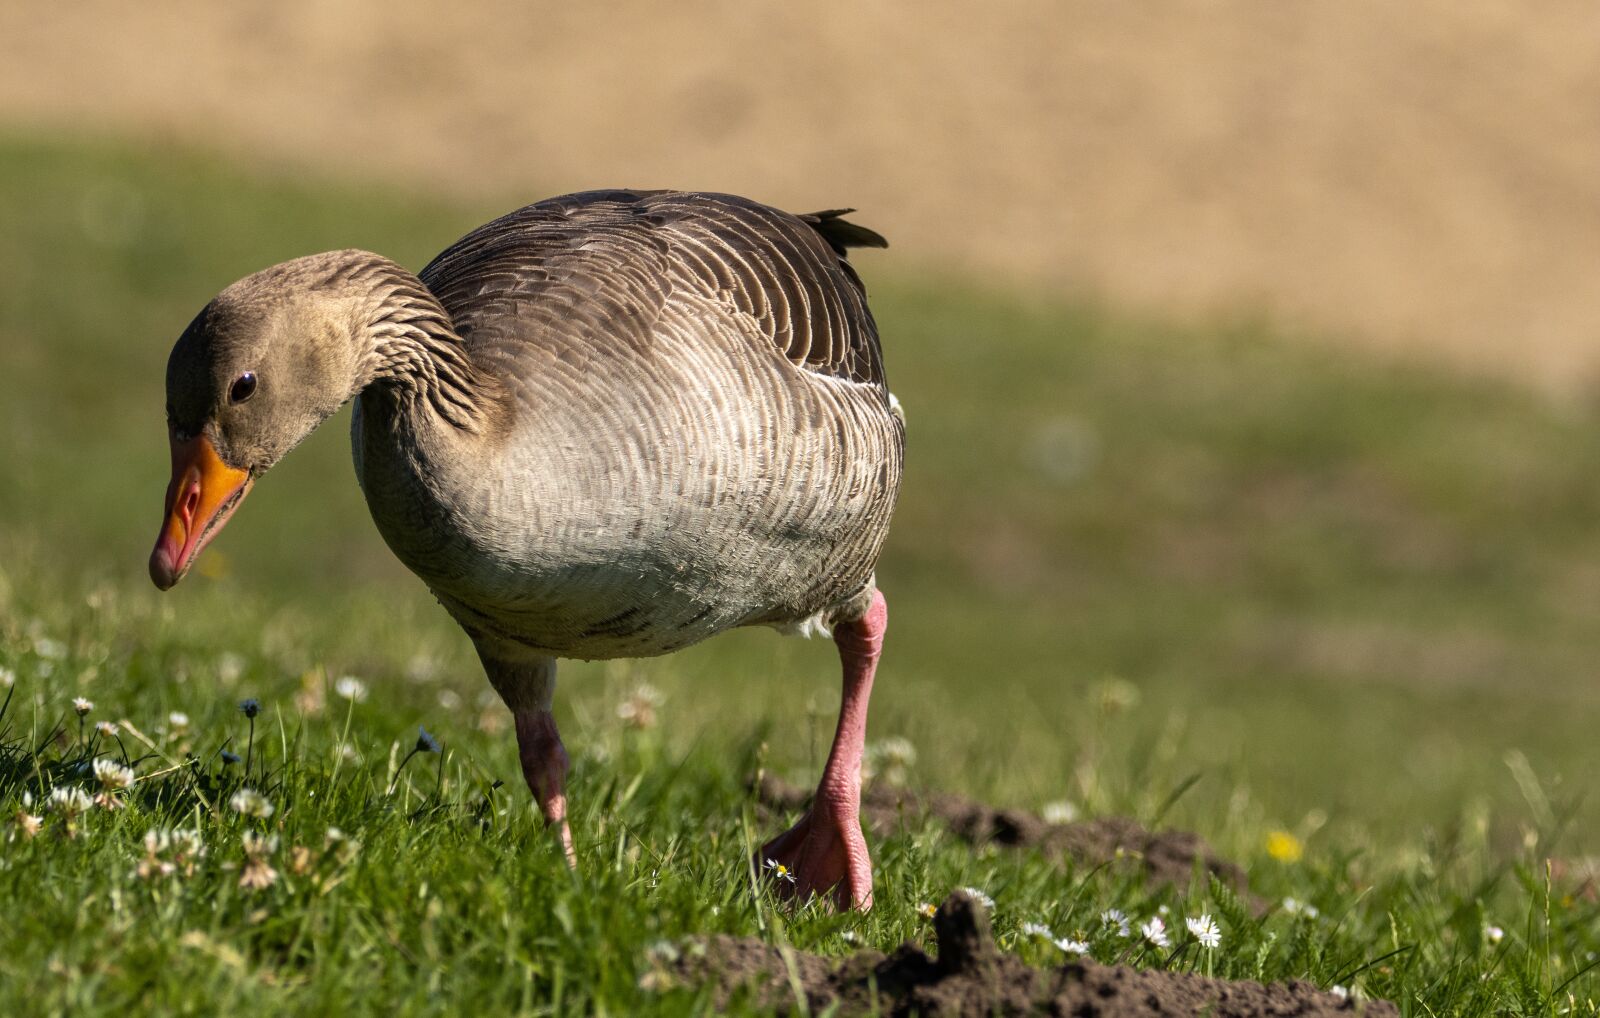 150-600mm F5-6.3 DG OS HSM | Contemporary 015 sample photo. Goose, meadow, bank photography